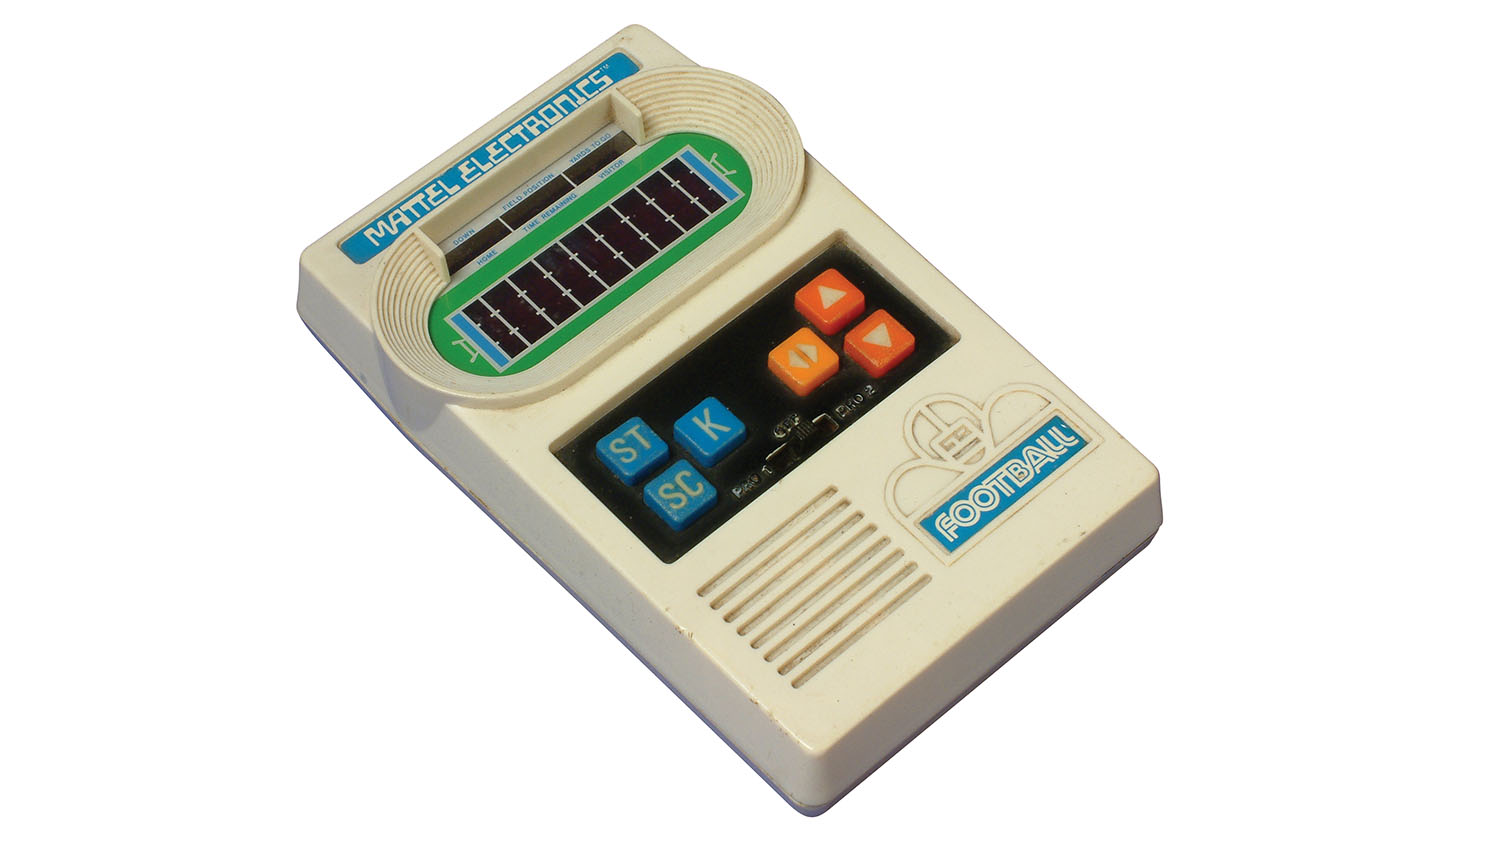 early handheld electronic game from Mattel